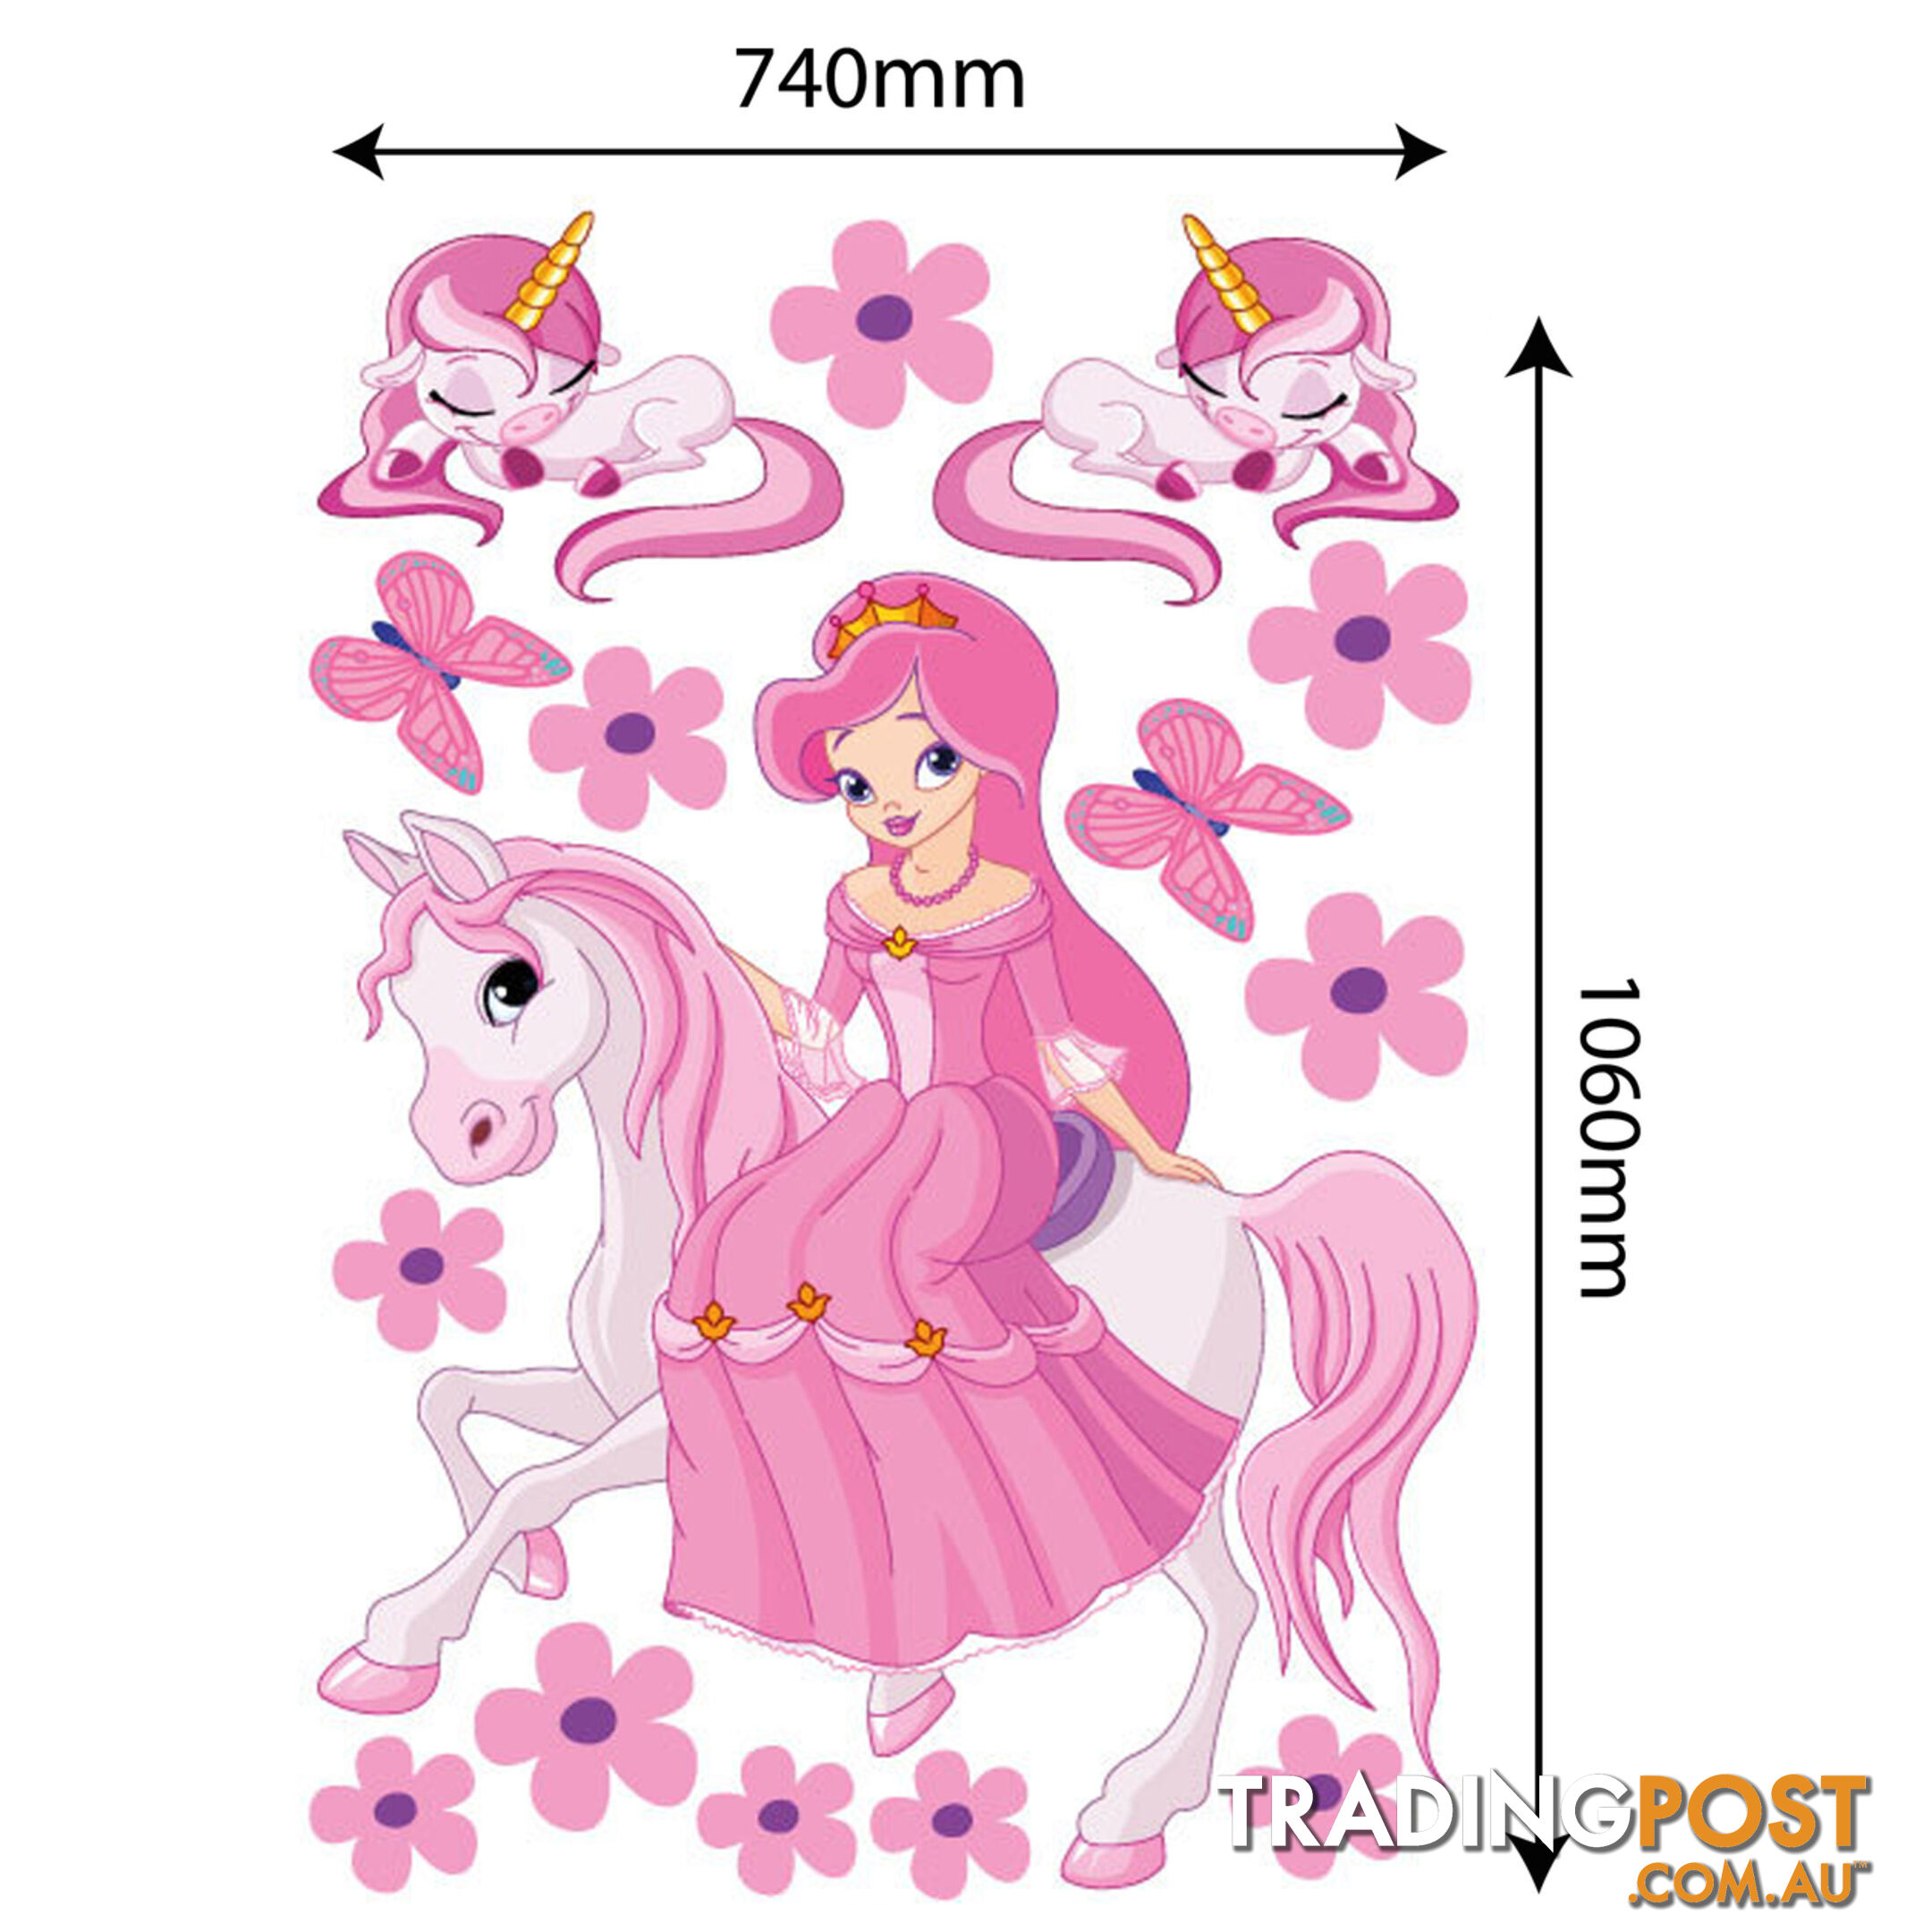 Extra Large Size Princess on a horse with unicorns Wall Sticker - Totally Movable